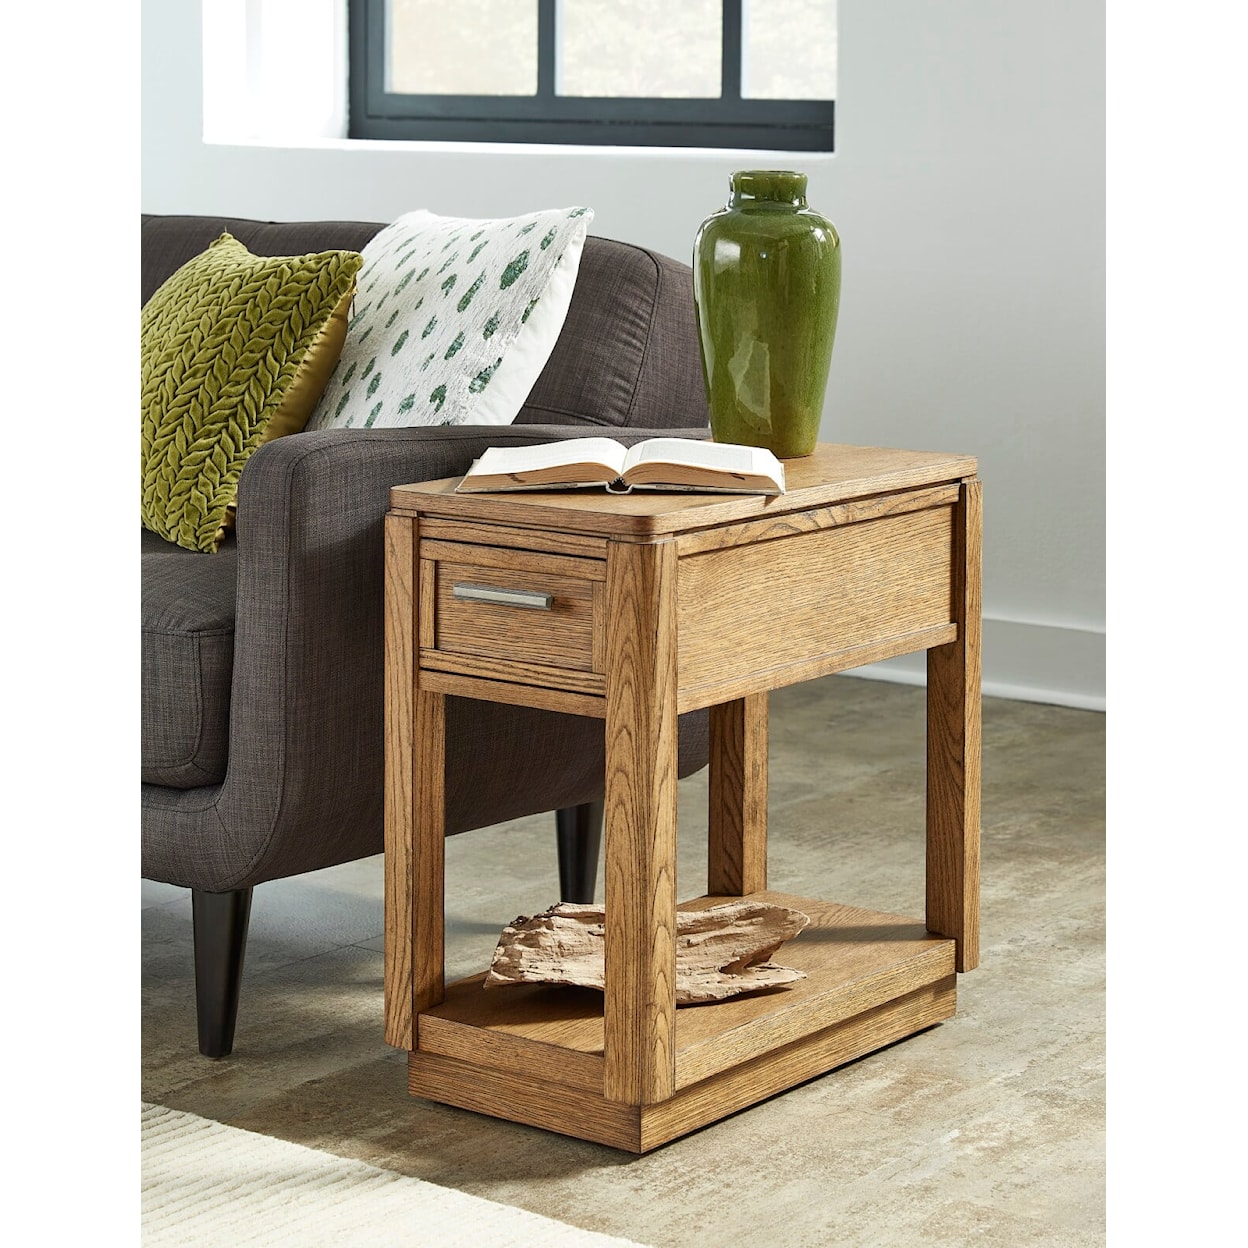 Null Furniture 6021 Huntington Beach Chairside End Table